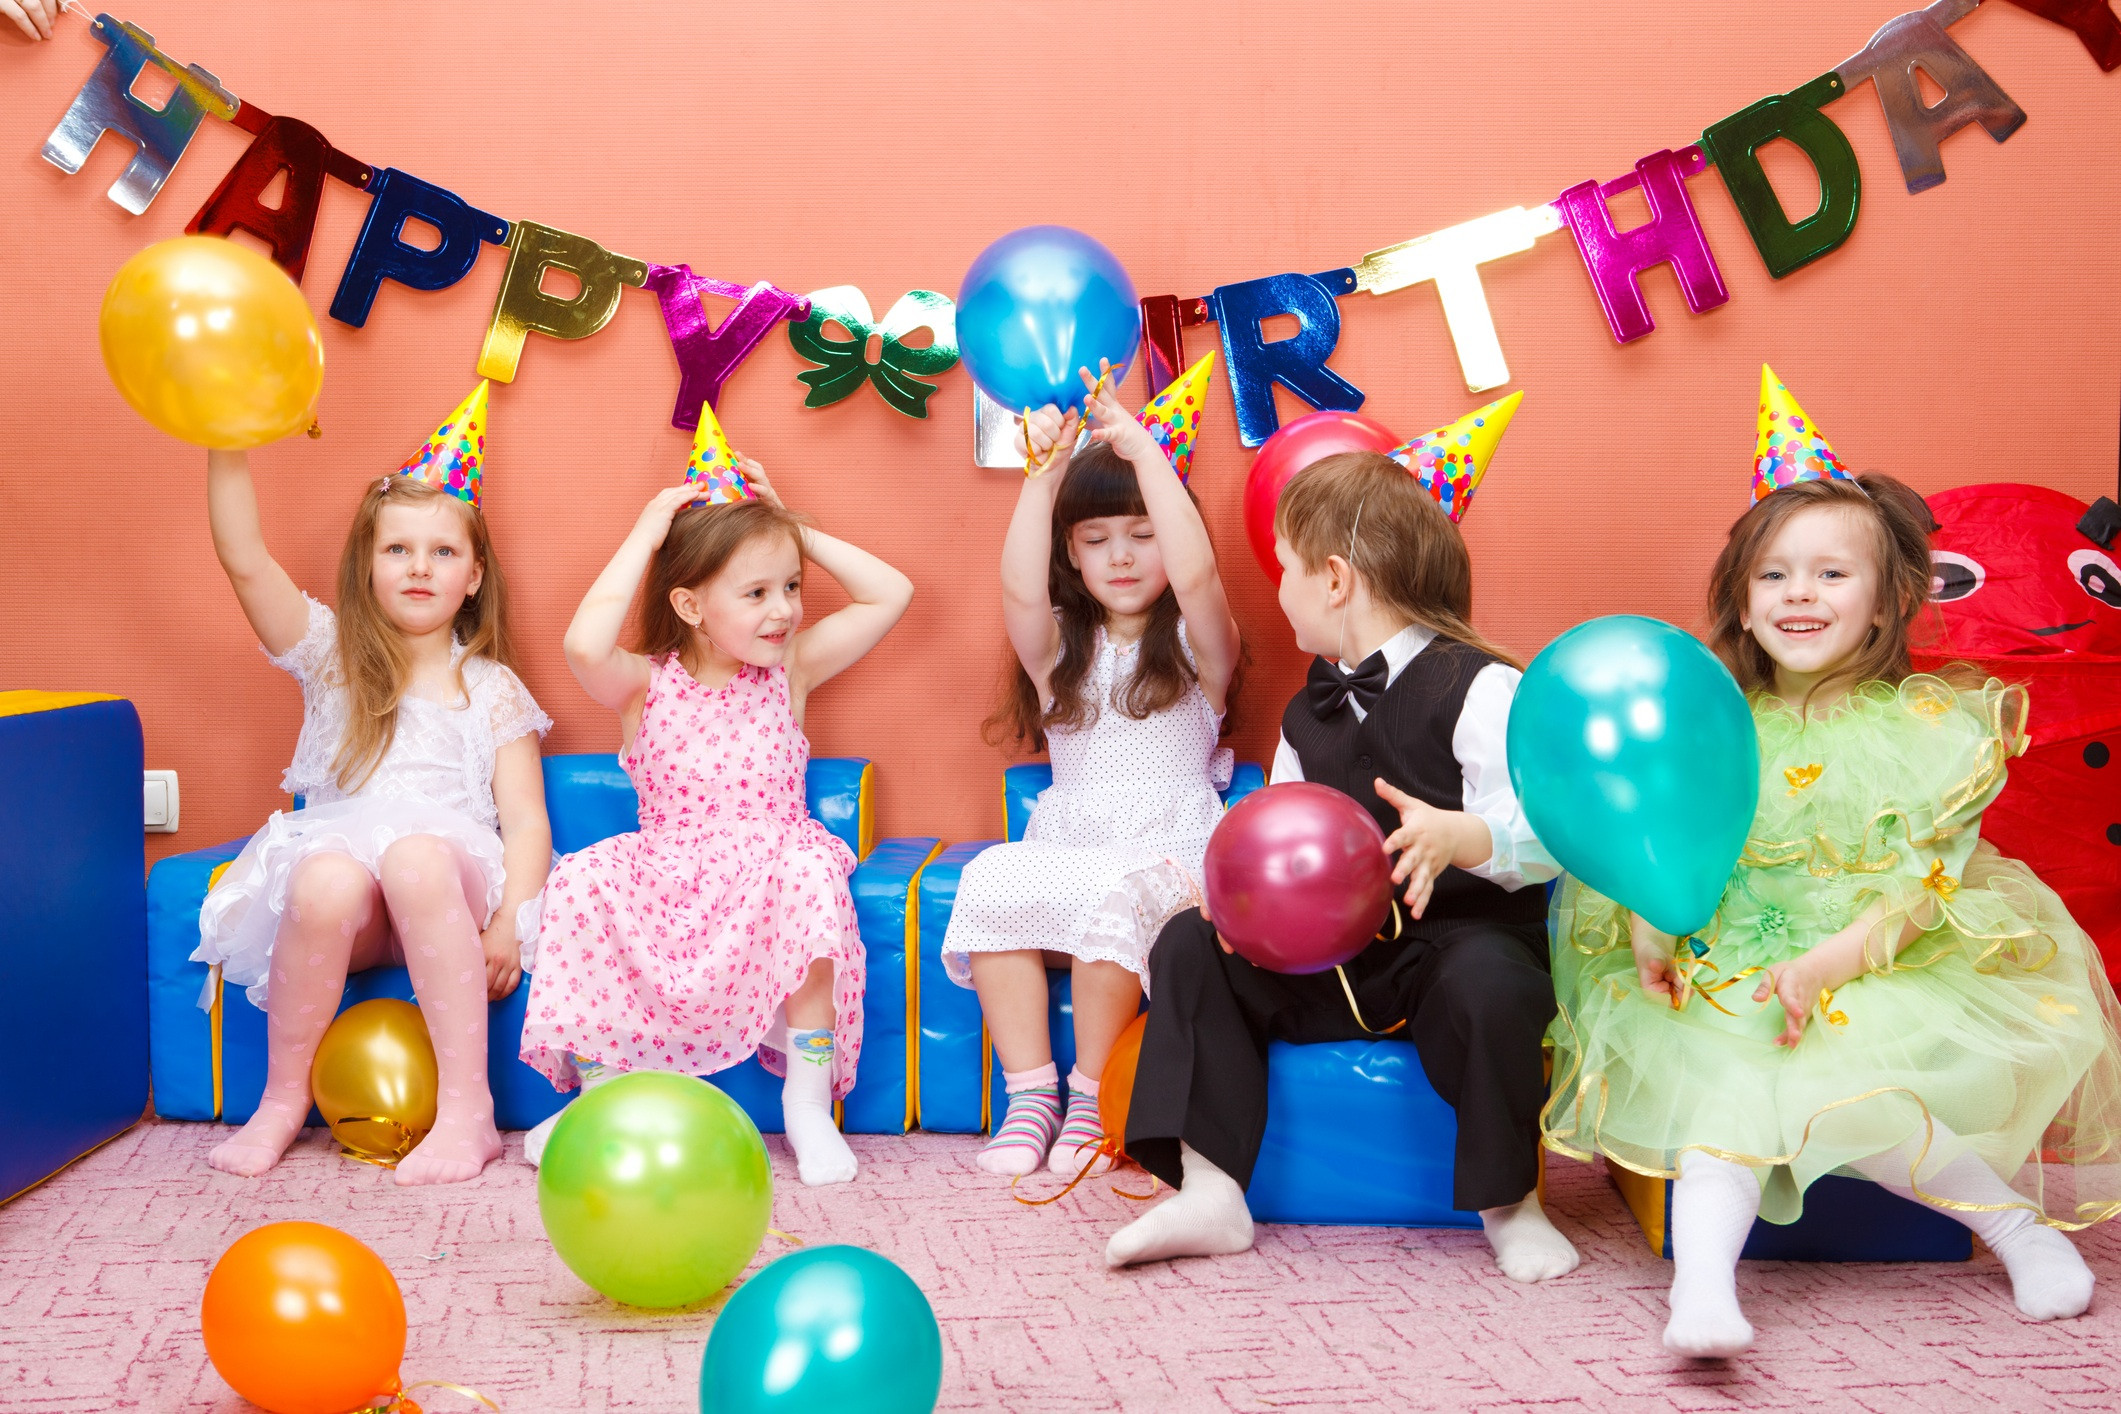 12 Year Old Birthday Party Ideas Not At Home
 45 Awesome 11 & 12 Year Old Birthday Party Ideas